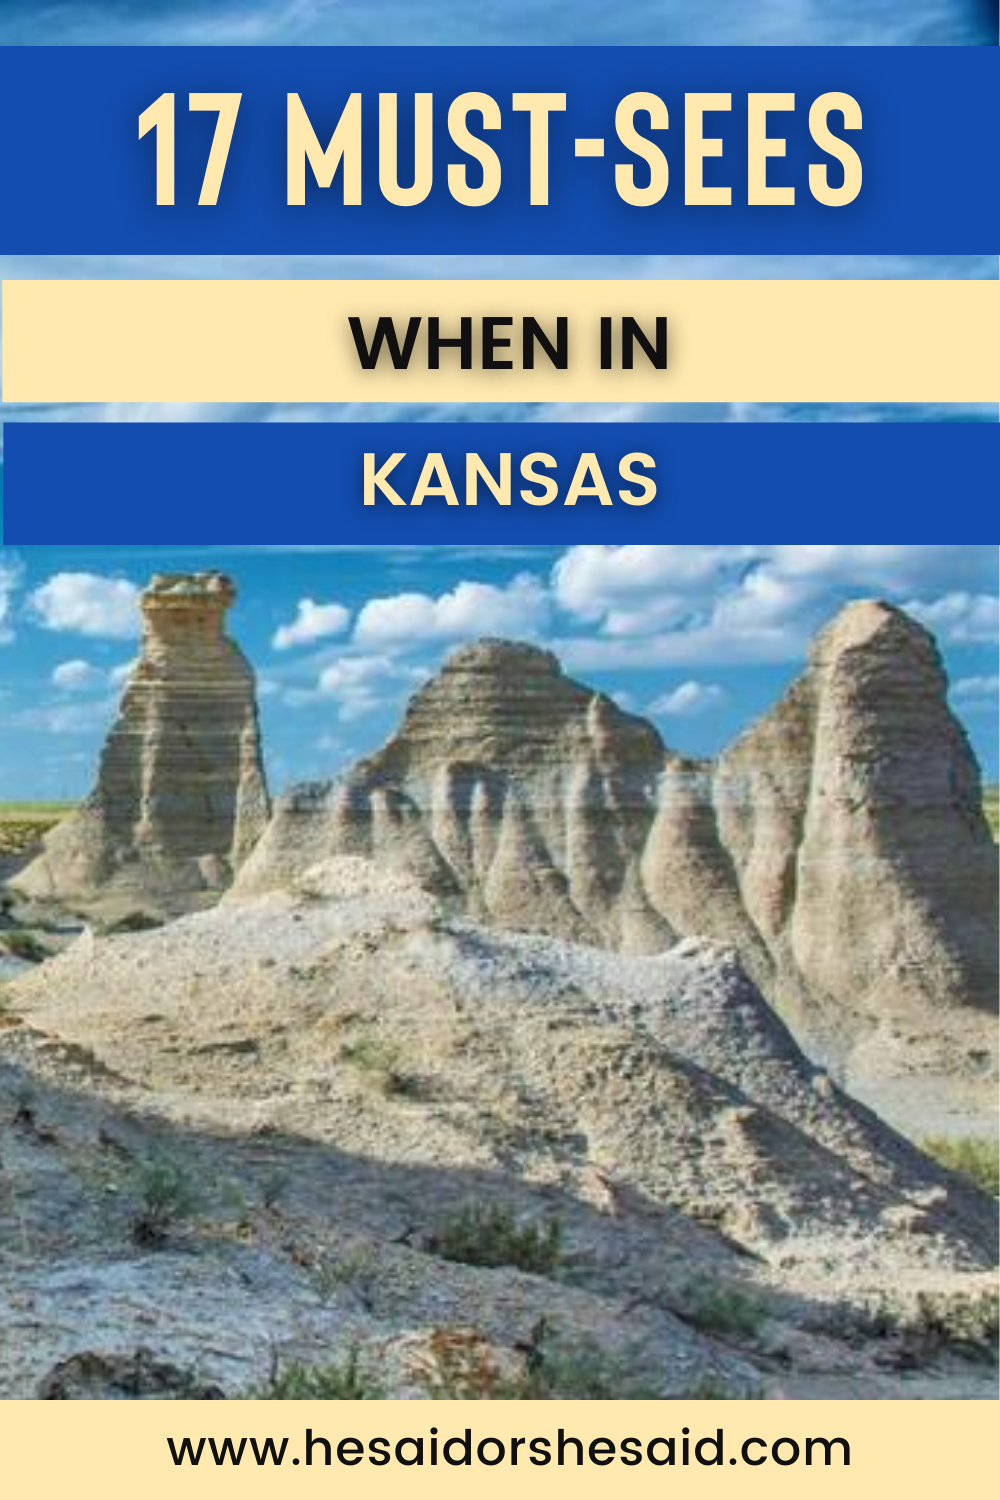 17 must-sees when in Kansas by hesaidorshesaid